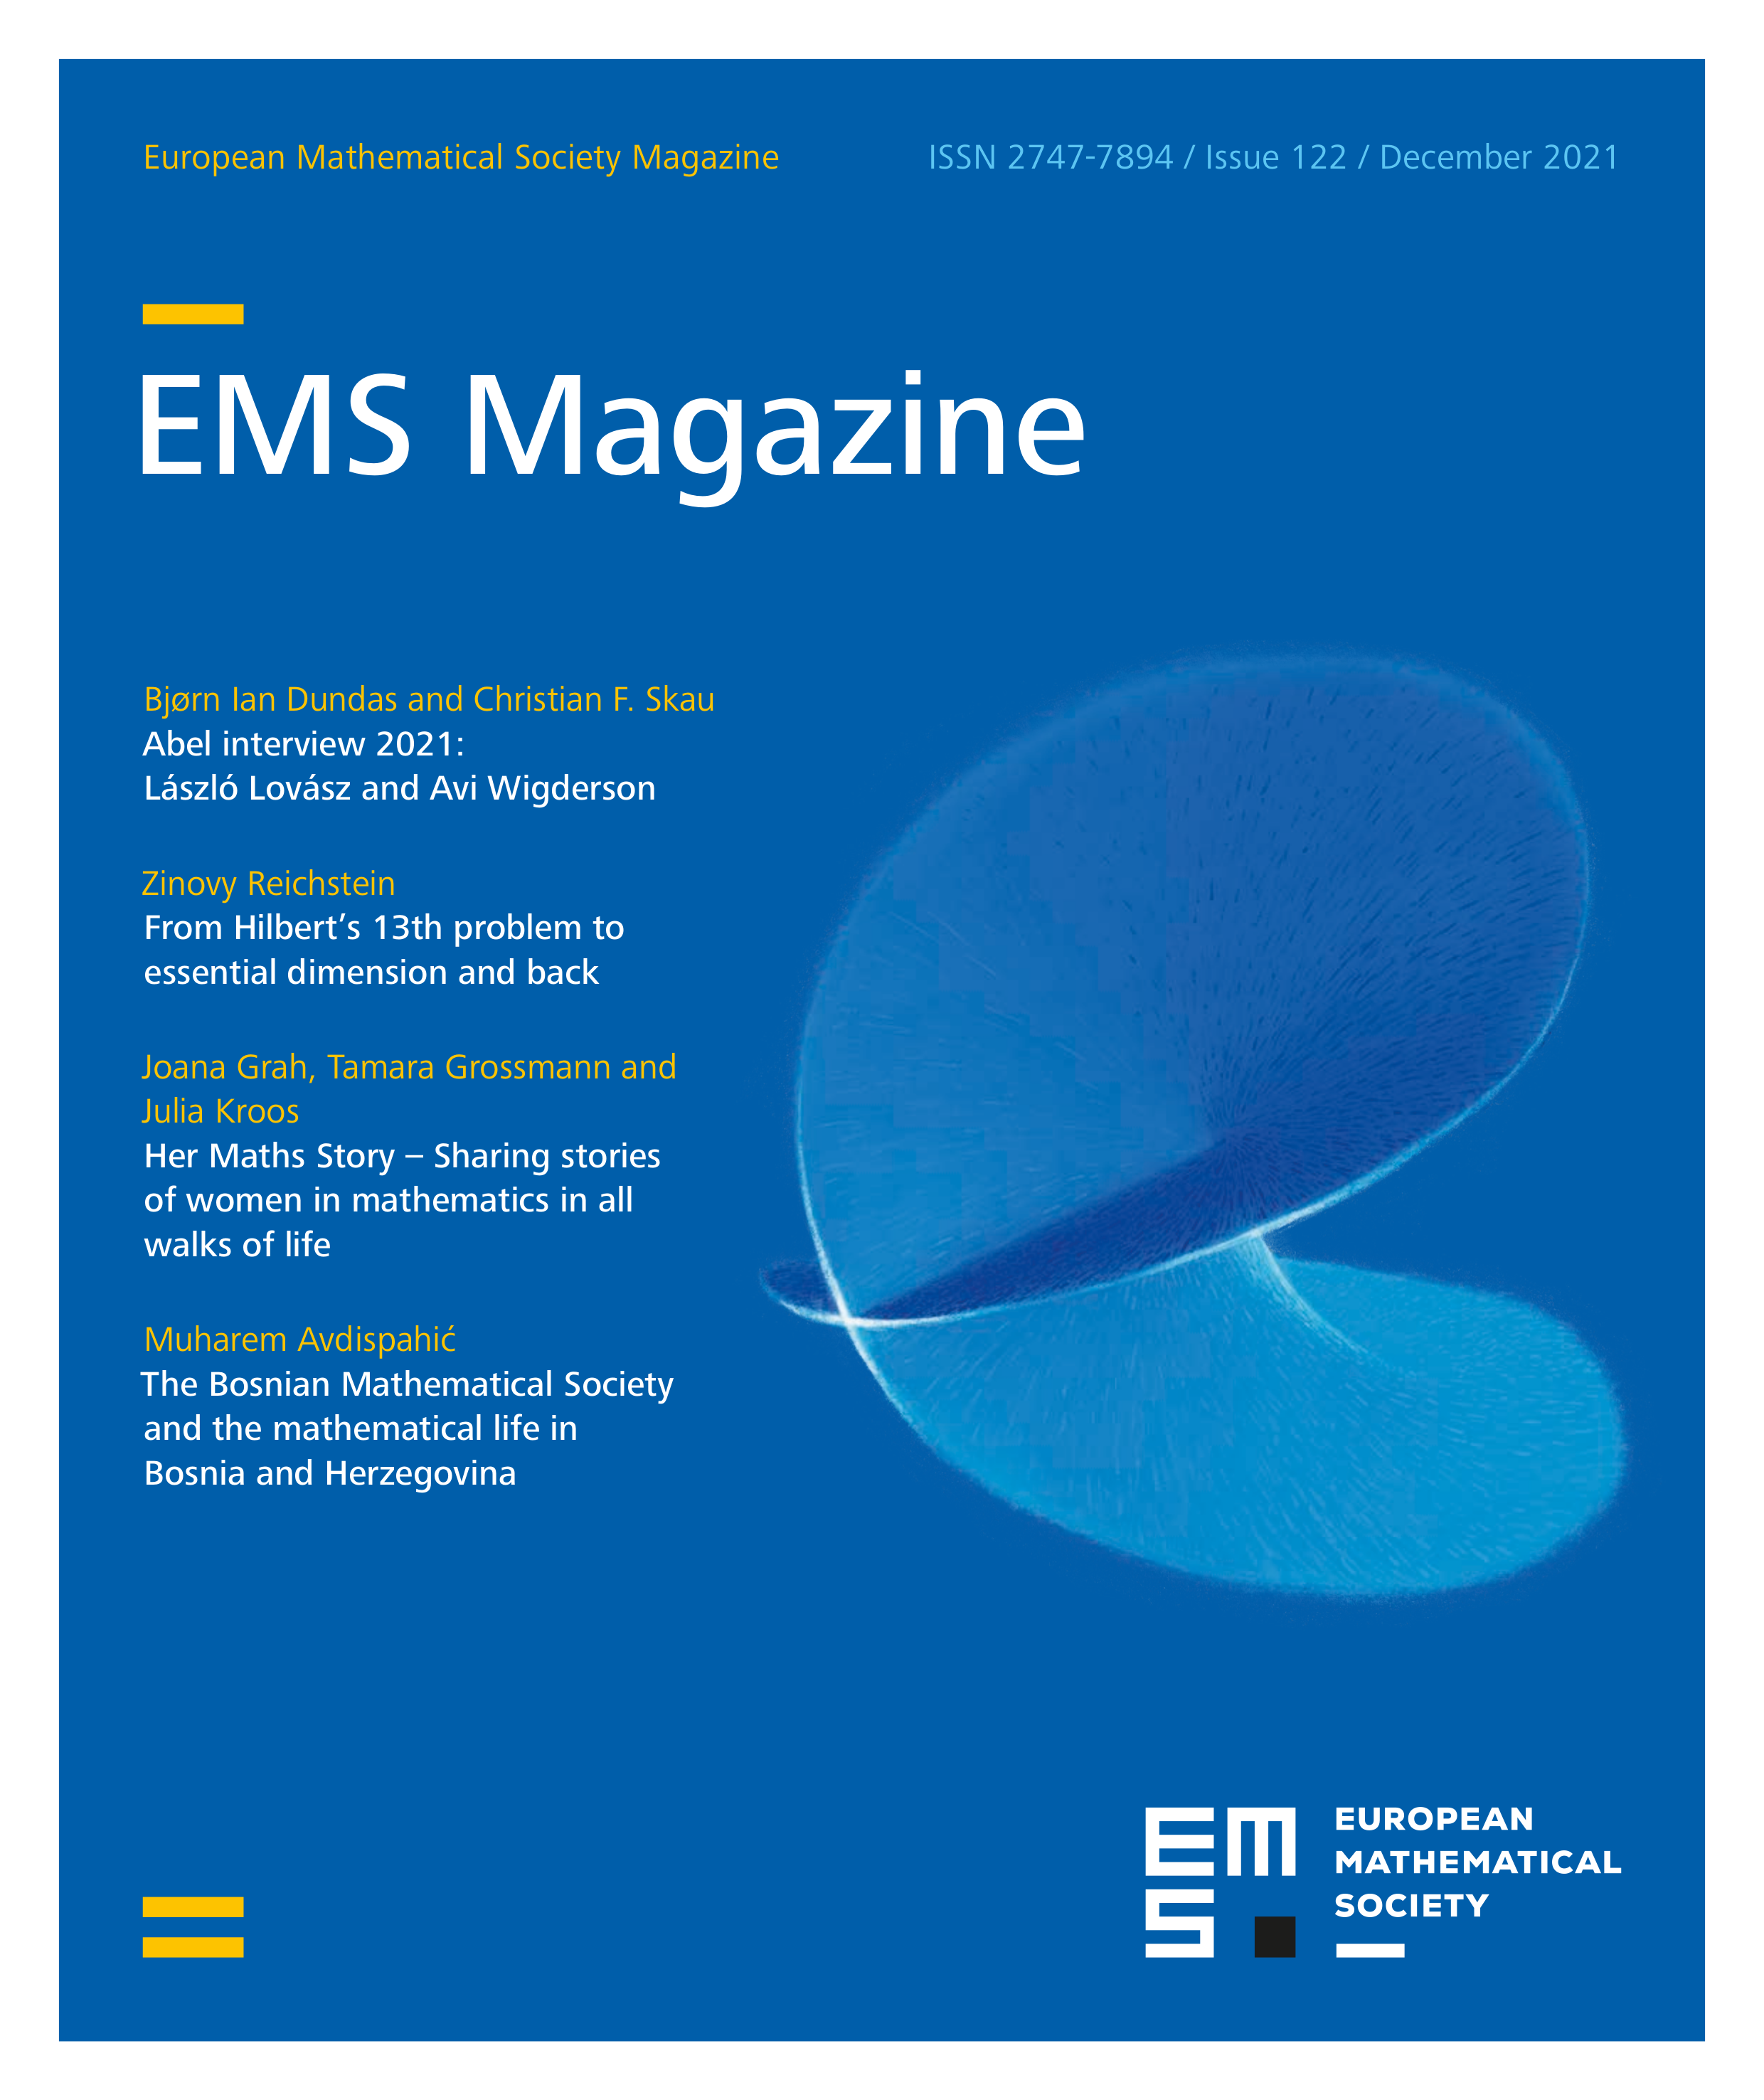 The EMS Publishing House cover